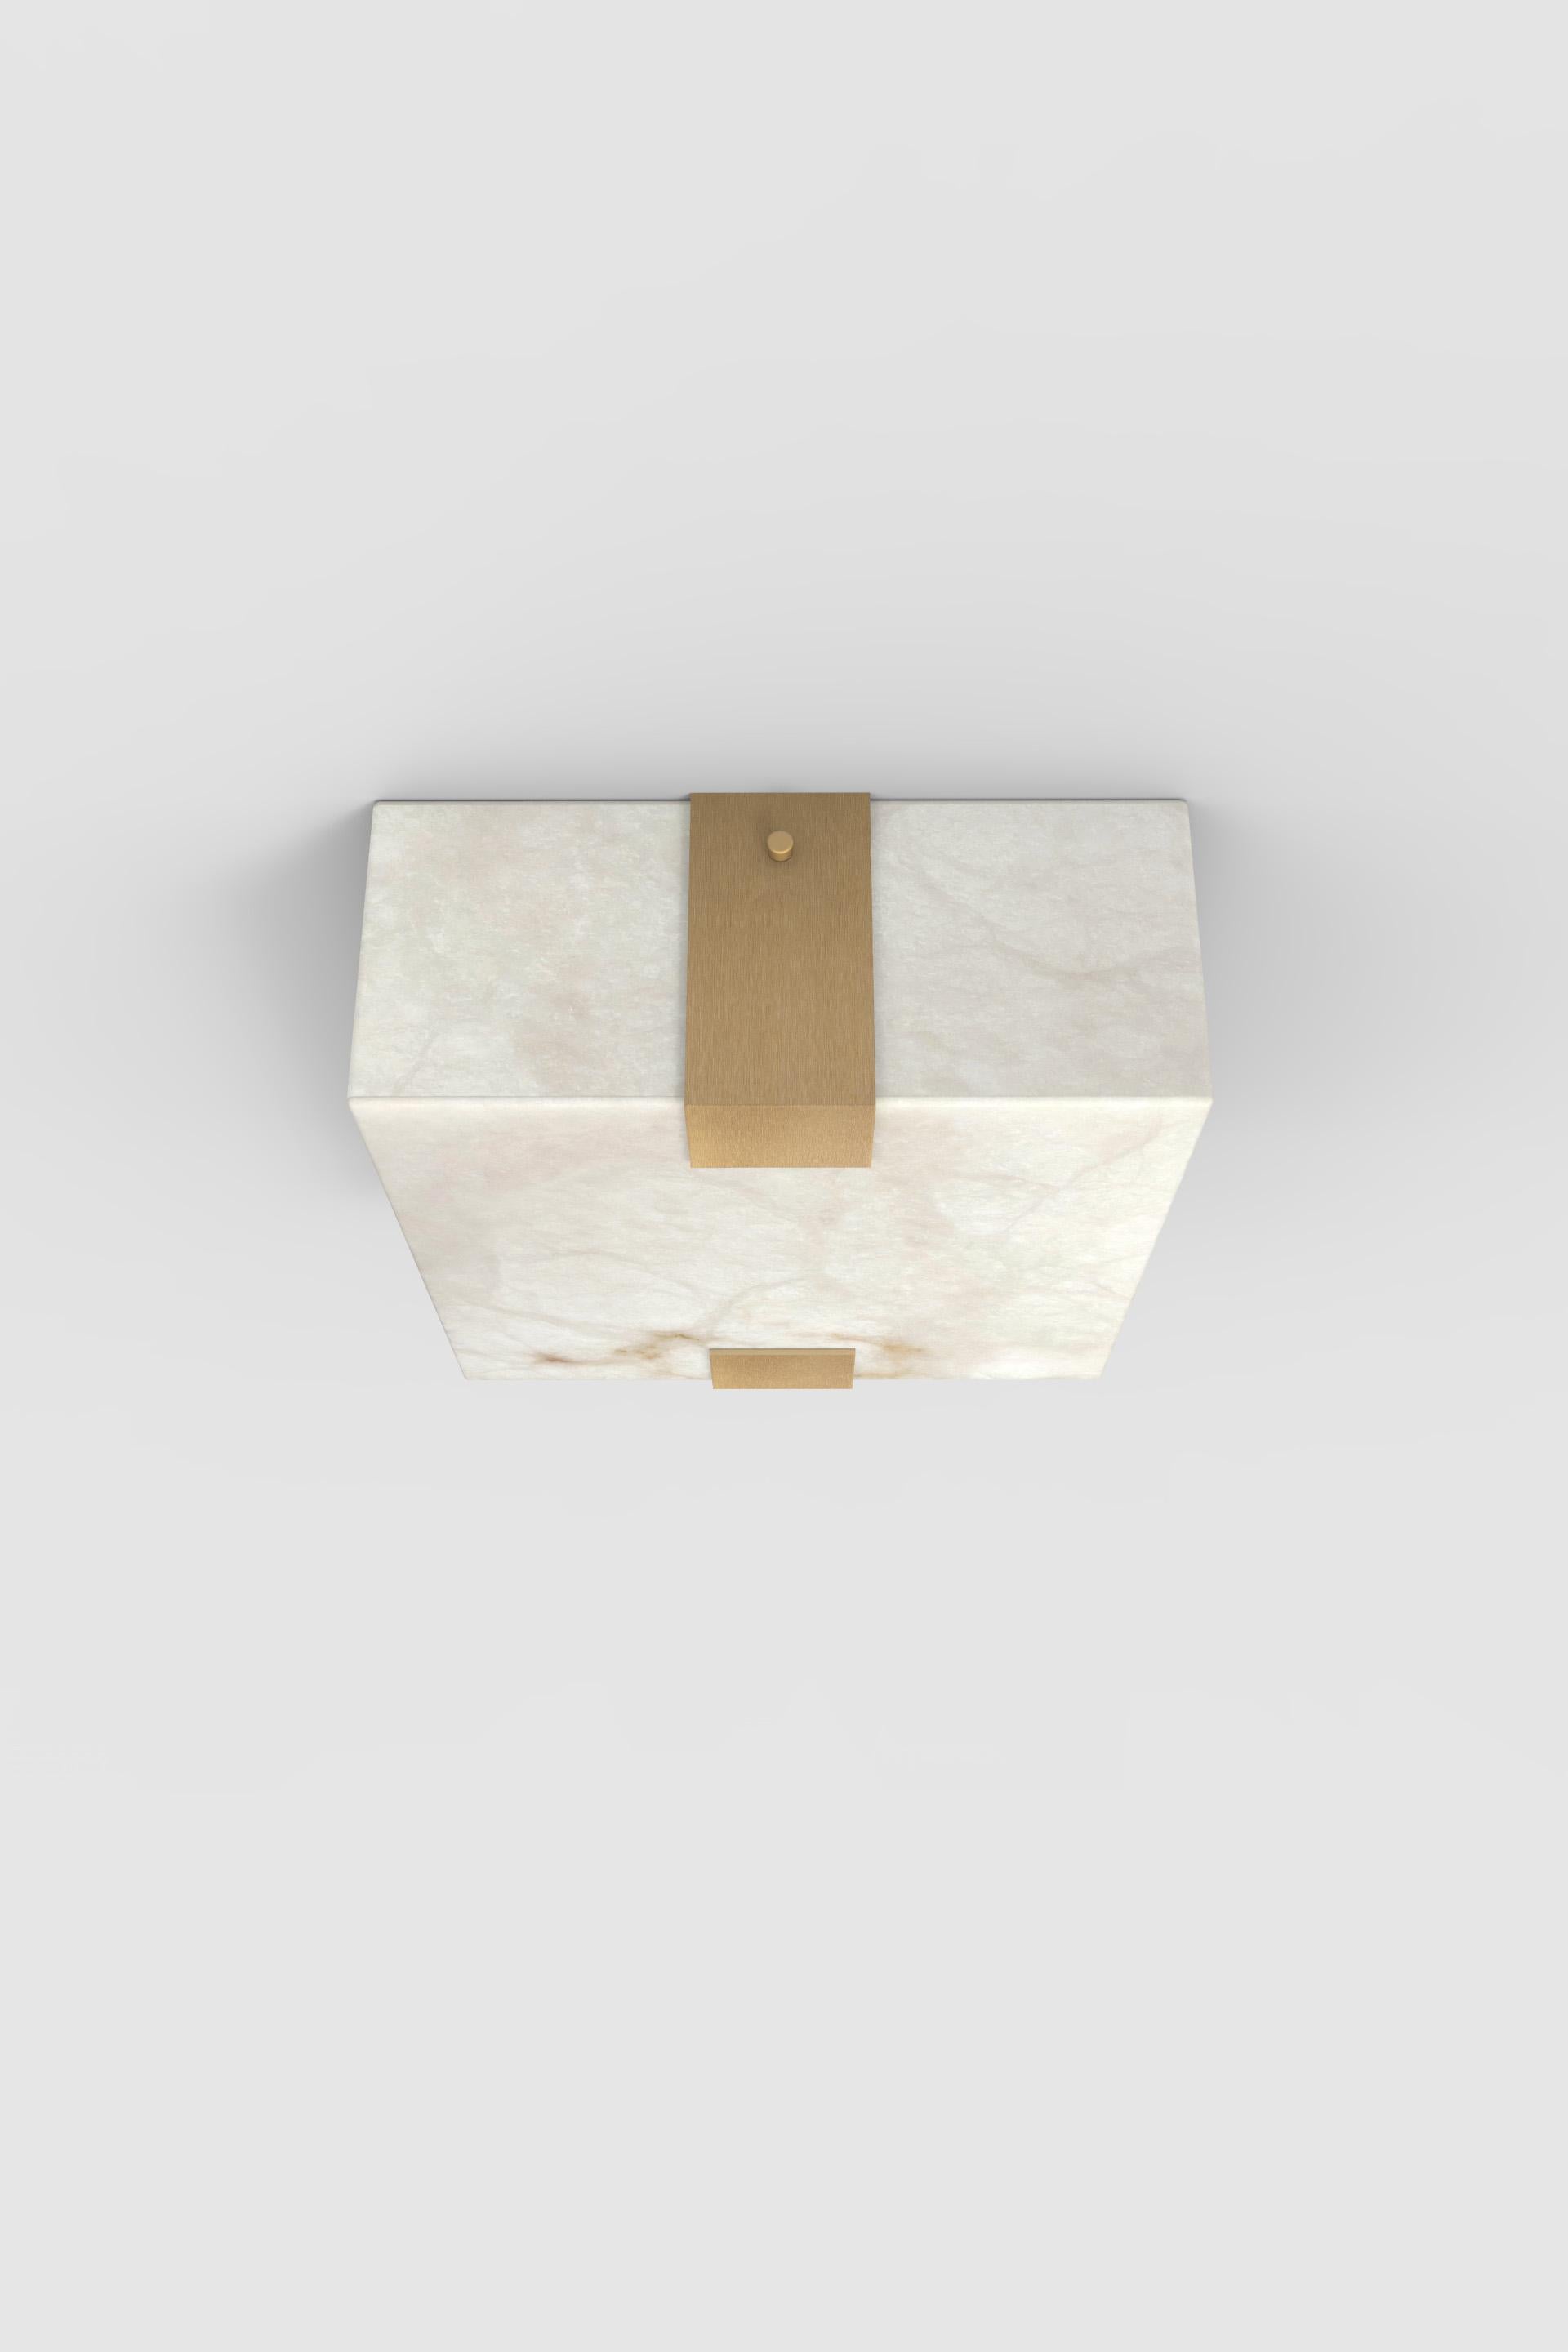 Post-Modern Contemporary Ponti Flush Mount 002A-2C in Alabaster by Orphan Work For Sale